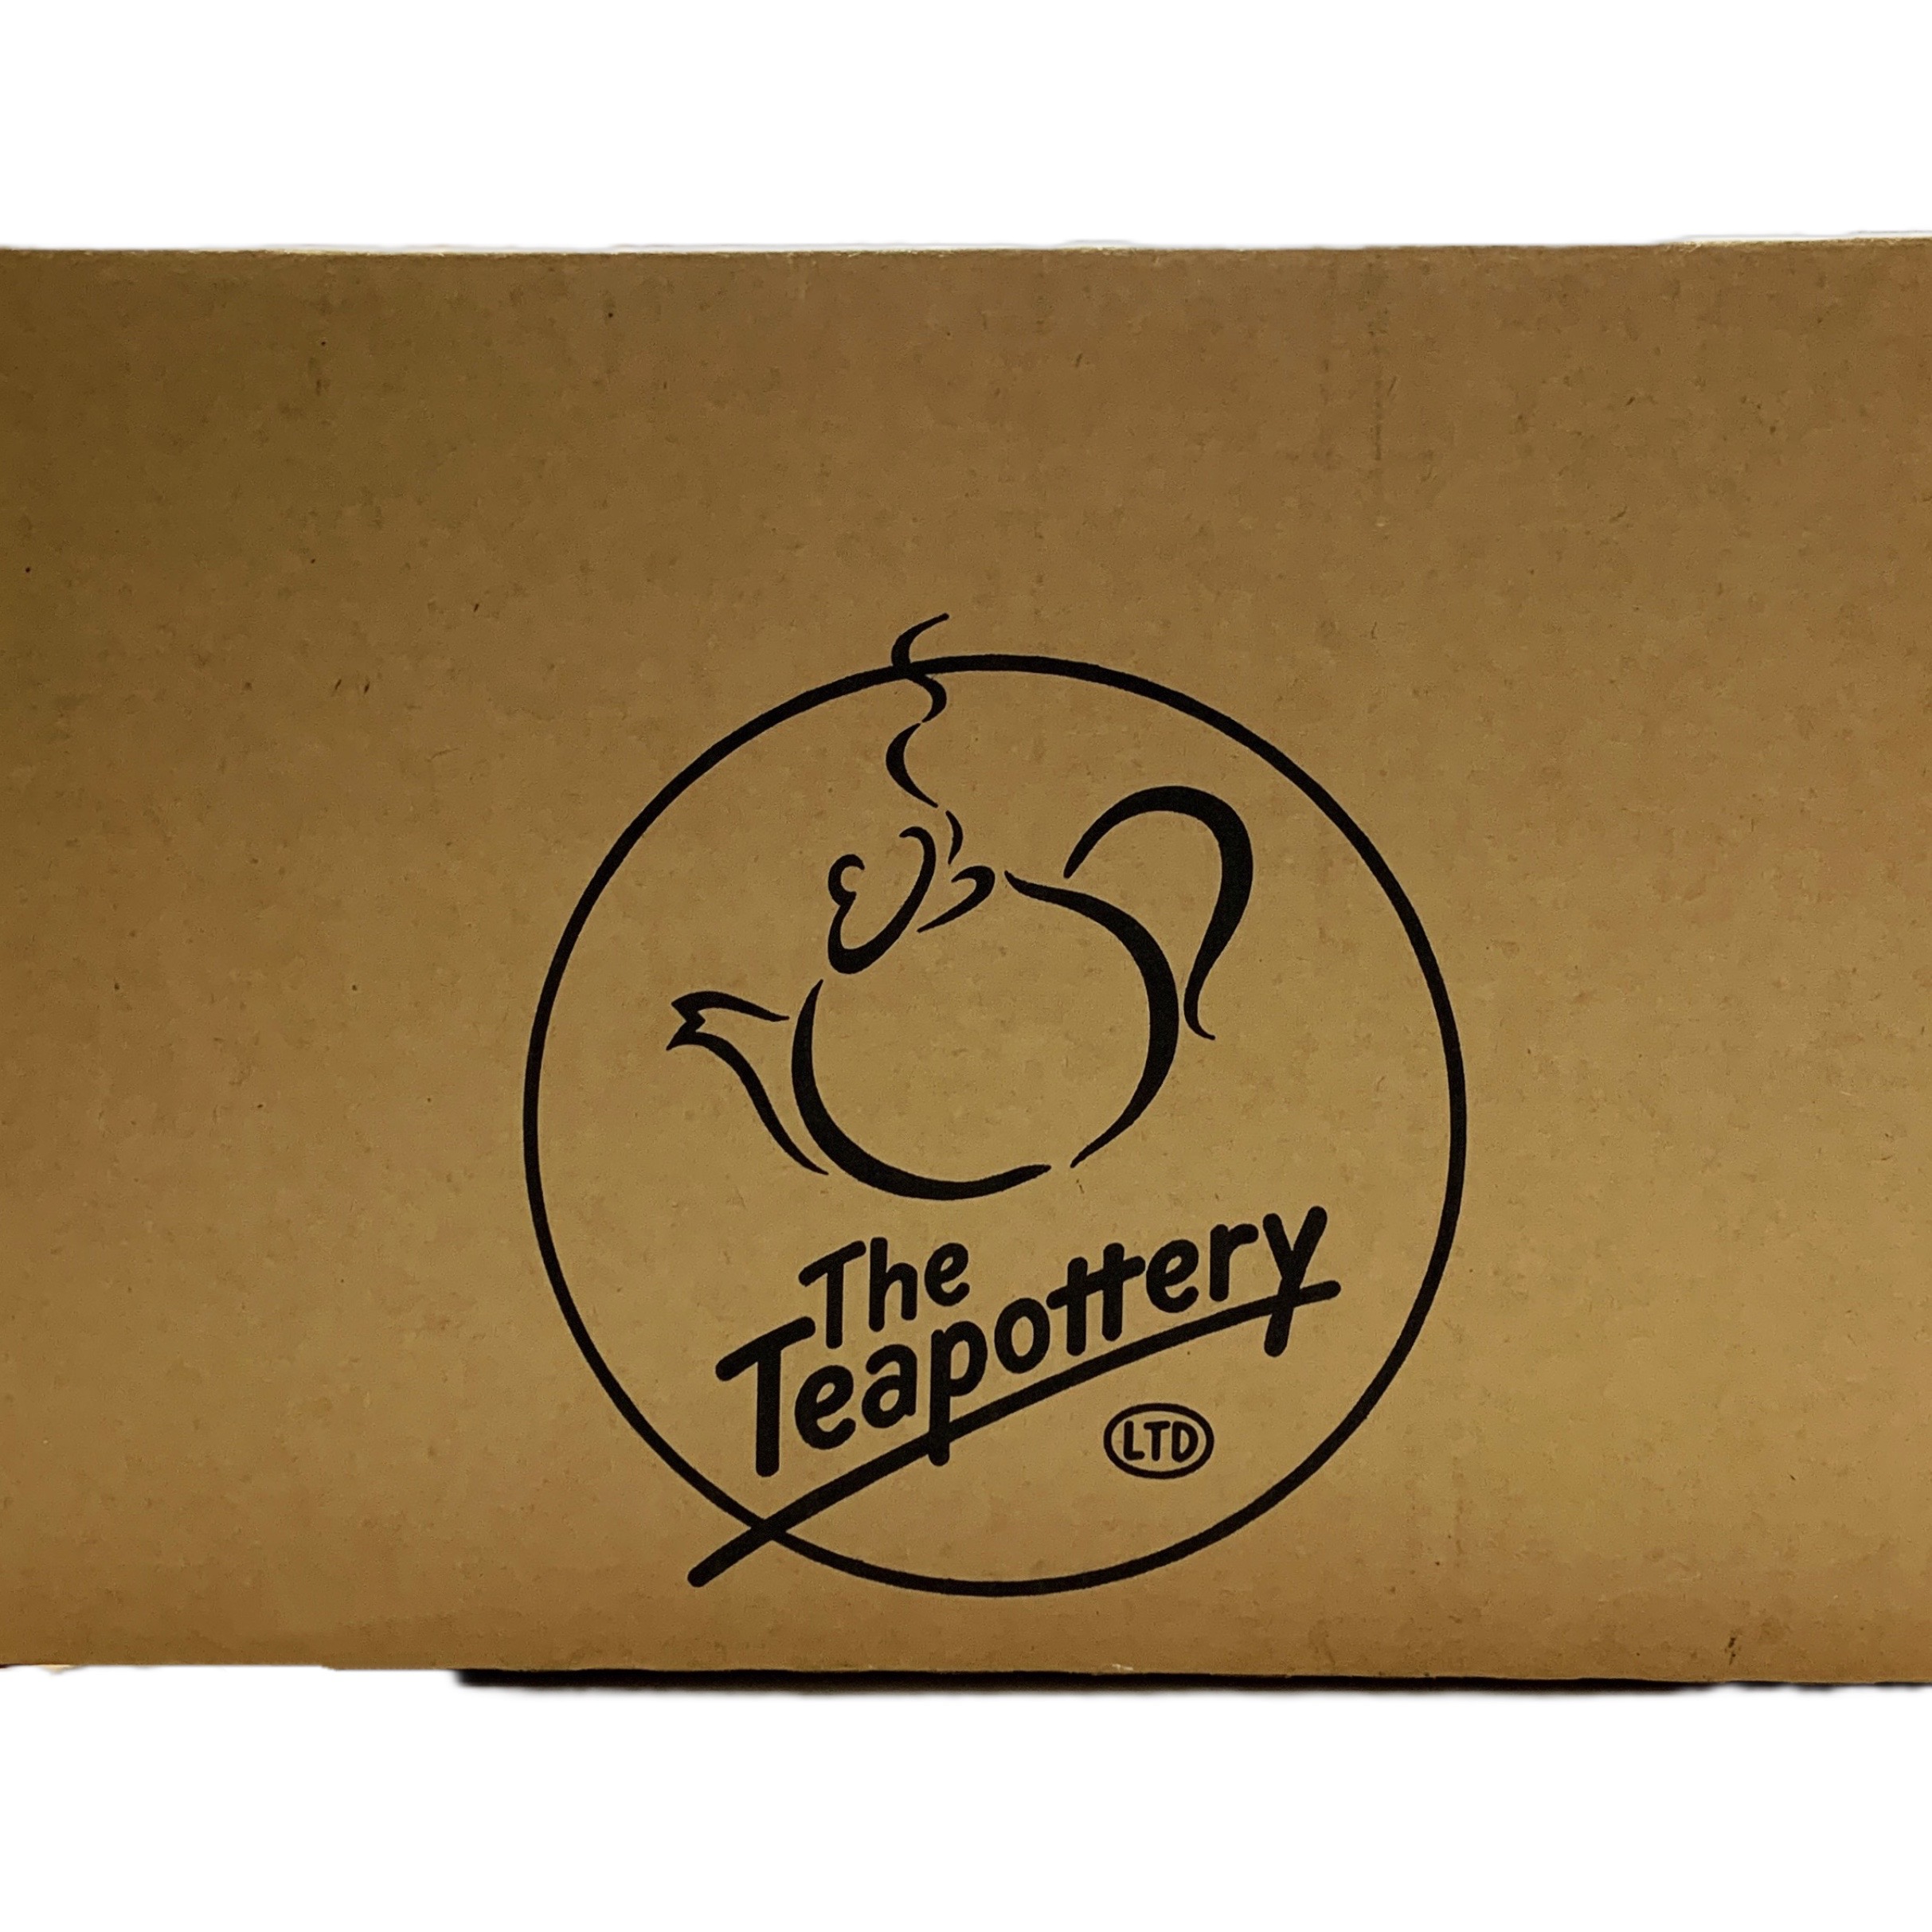 The Teapottery – LYLE’S GOLDEN SYRUP TIN